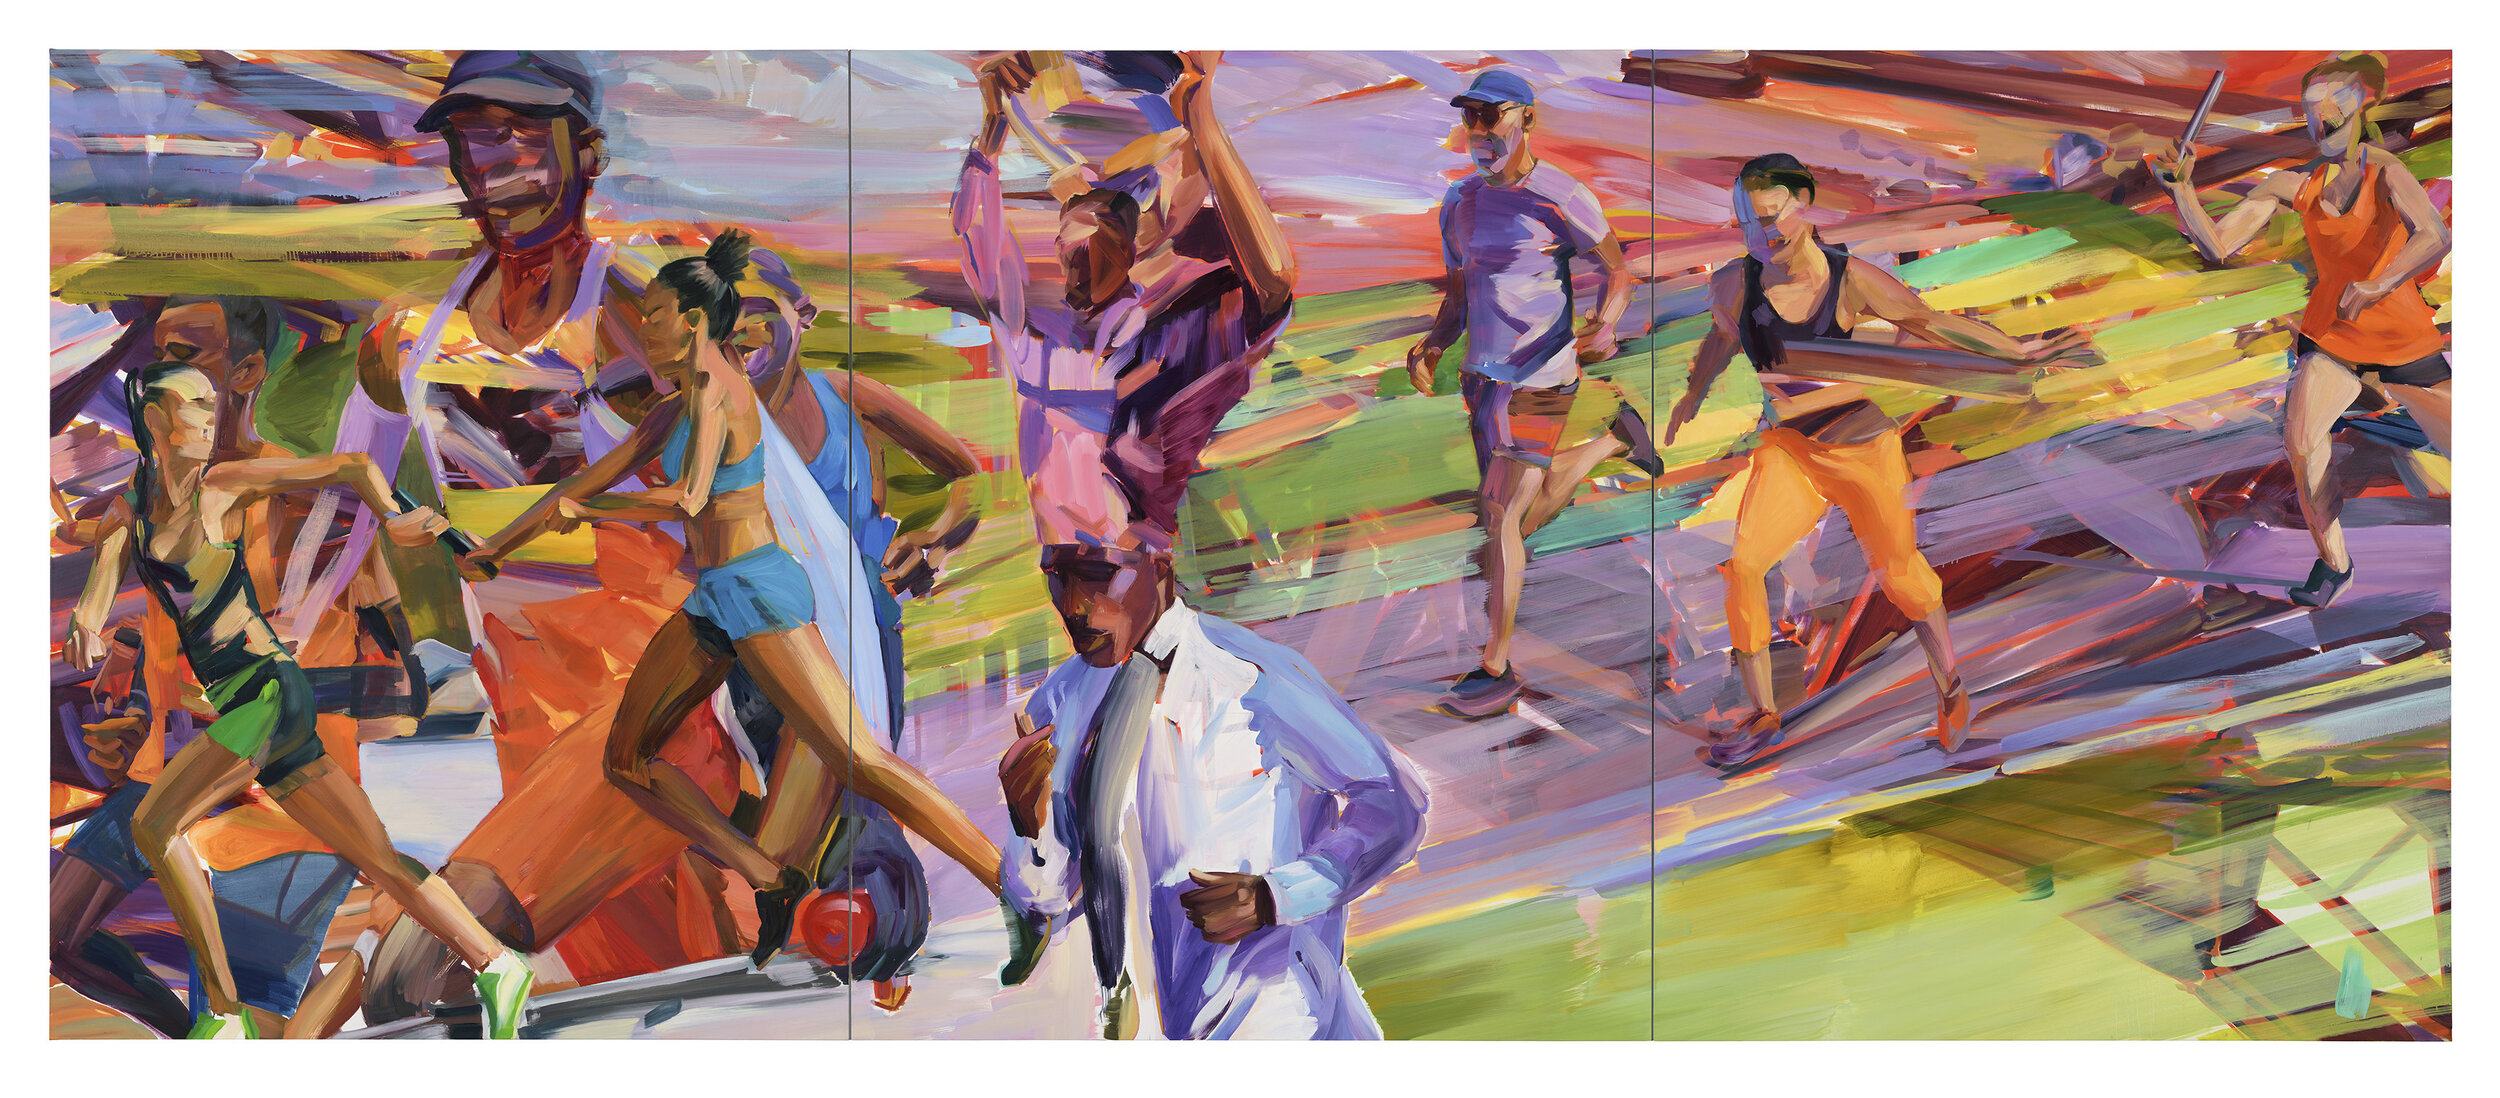   Multiple Realities (Relay) , triptych, 2021, oil on canvas, 220 x 534 cm. Private collection (Austria). 